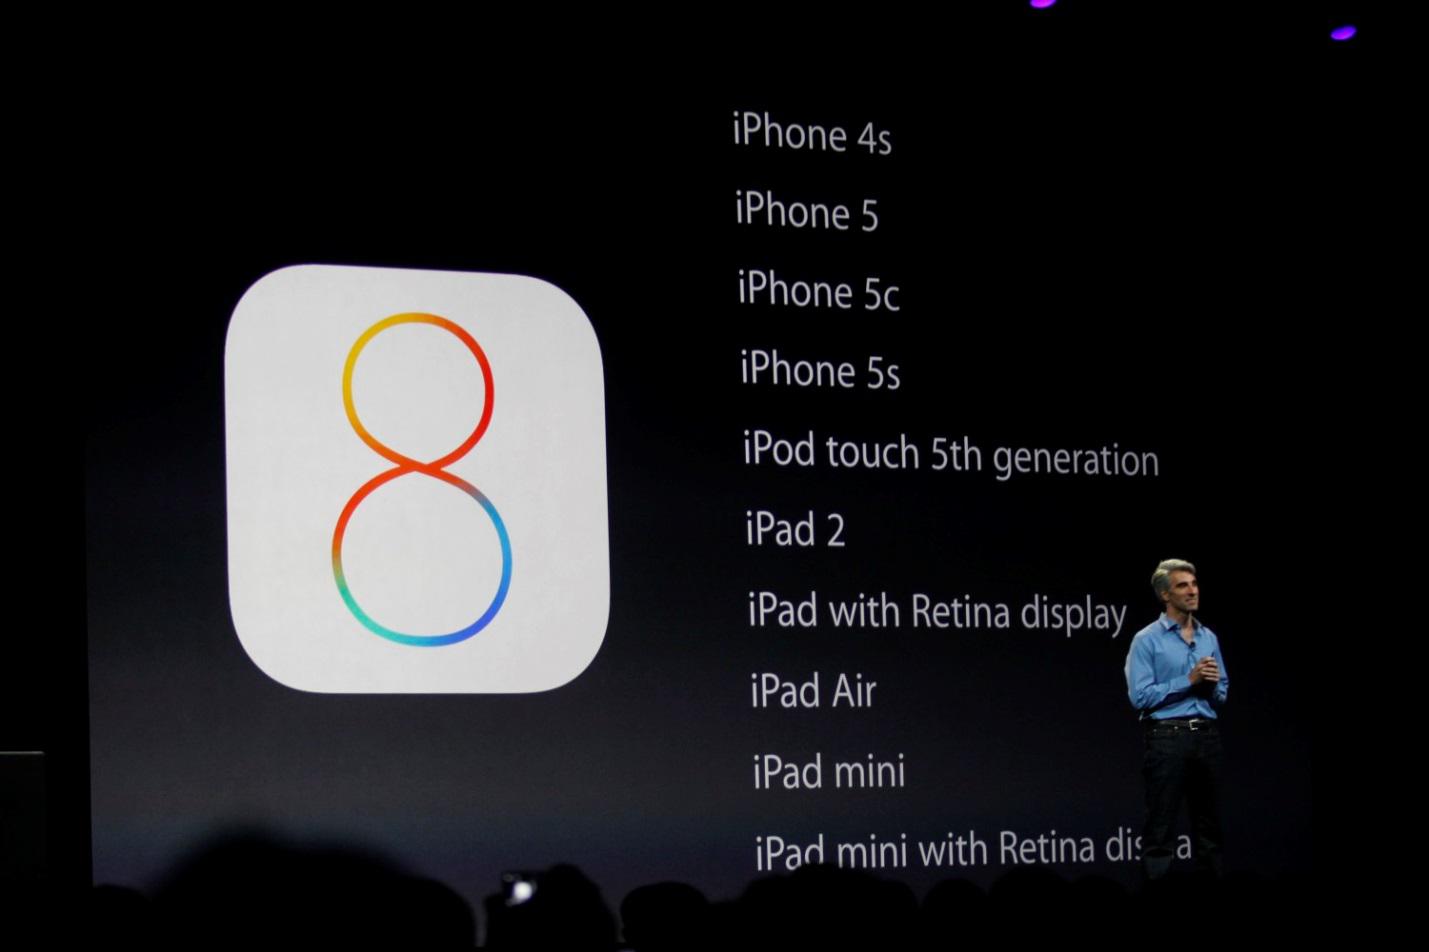 A sneak peek at coolest iOS 8 features